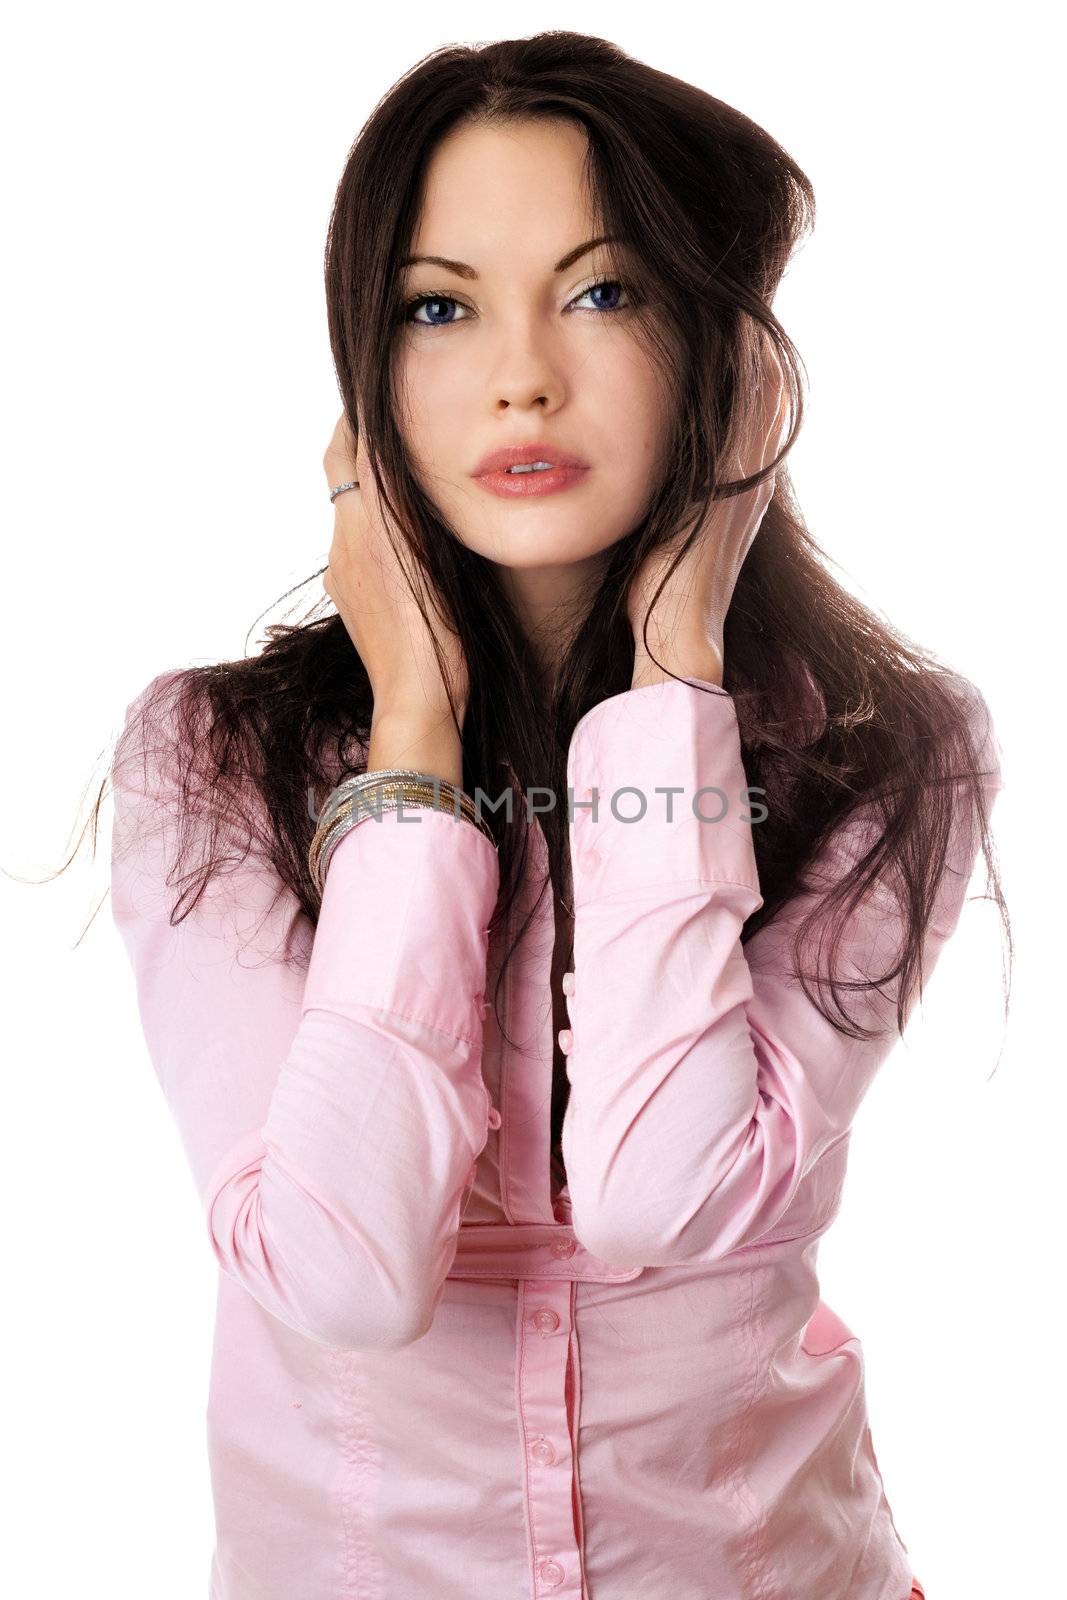 Portrait of pretty young woman in pink shirt